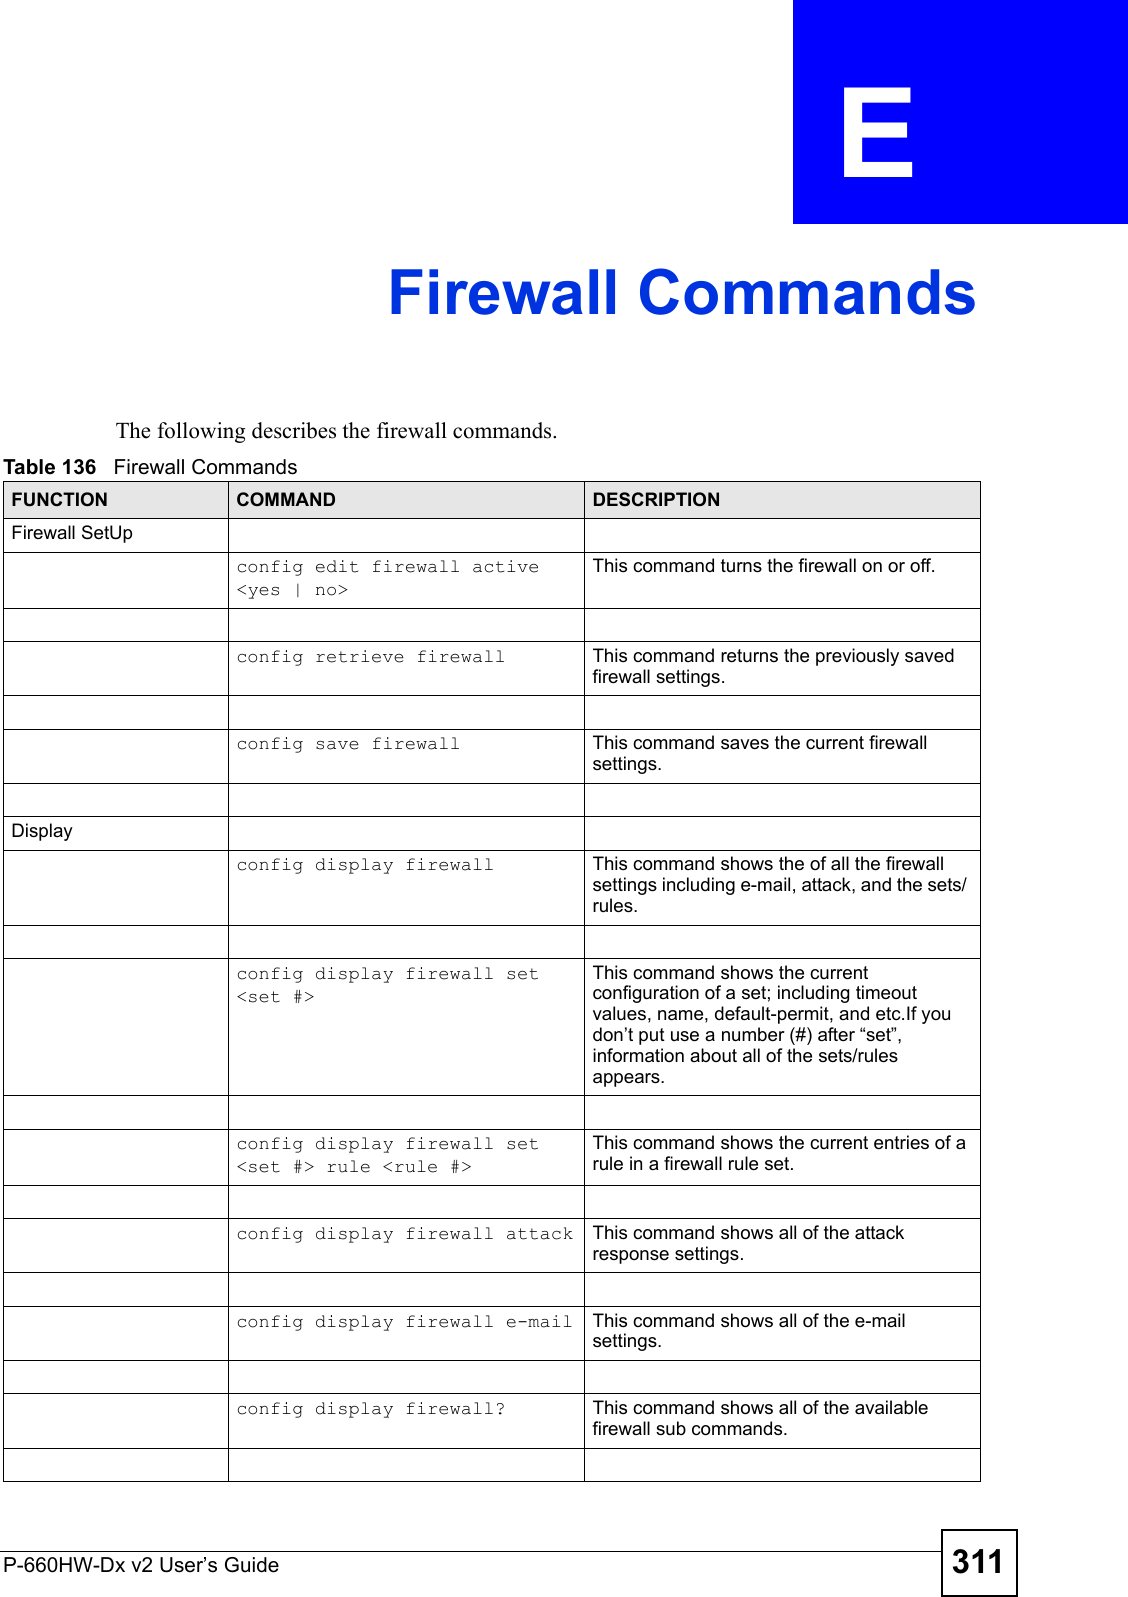 P-660HW-Dx v2 User’s Guide 311APPENDIX  E Firewall CommandsThe following describes the firewall commands. Table 136   Firewall CommandsFUNCTION COMMAND DESCRIPTIONFirewall SetUpconfig edit firewall active &lt;yes | no&gt;This command turns the firewall on or off.config retrieve firewall  This command returns the previously saved firewall settings.config save firewall This command saves the current firewall settings.Displayconfig display firewall  This command shows the of all the firewall settings including e-mail, attack, and the sets/ rules.config display firewall set &lt;set #&gt;This command shows the current configuration of a set; including timeout values, name, default-permit, and etc.If you don’t put use a number (#) after “set”, information about all of the sets/rules appears.config display firewall set &lt;set #&gt; rule &lt;rule #&gt;This command shows the current entries of a rule in a firewall rule set. config display firewall attack This command shows all of the attack response settings.config display firewall e-mail This command shows all of the e-mail settings.config display firewall? This command shows all of the available firewall sub commands.